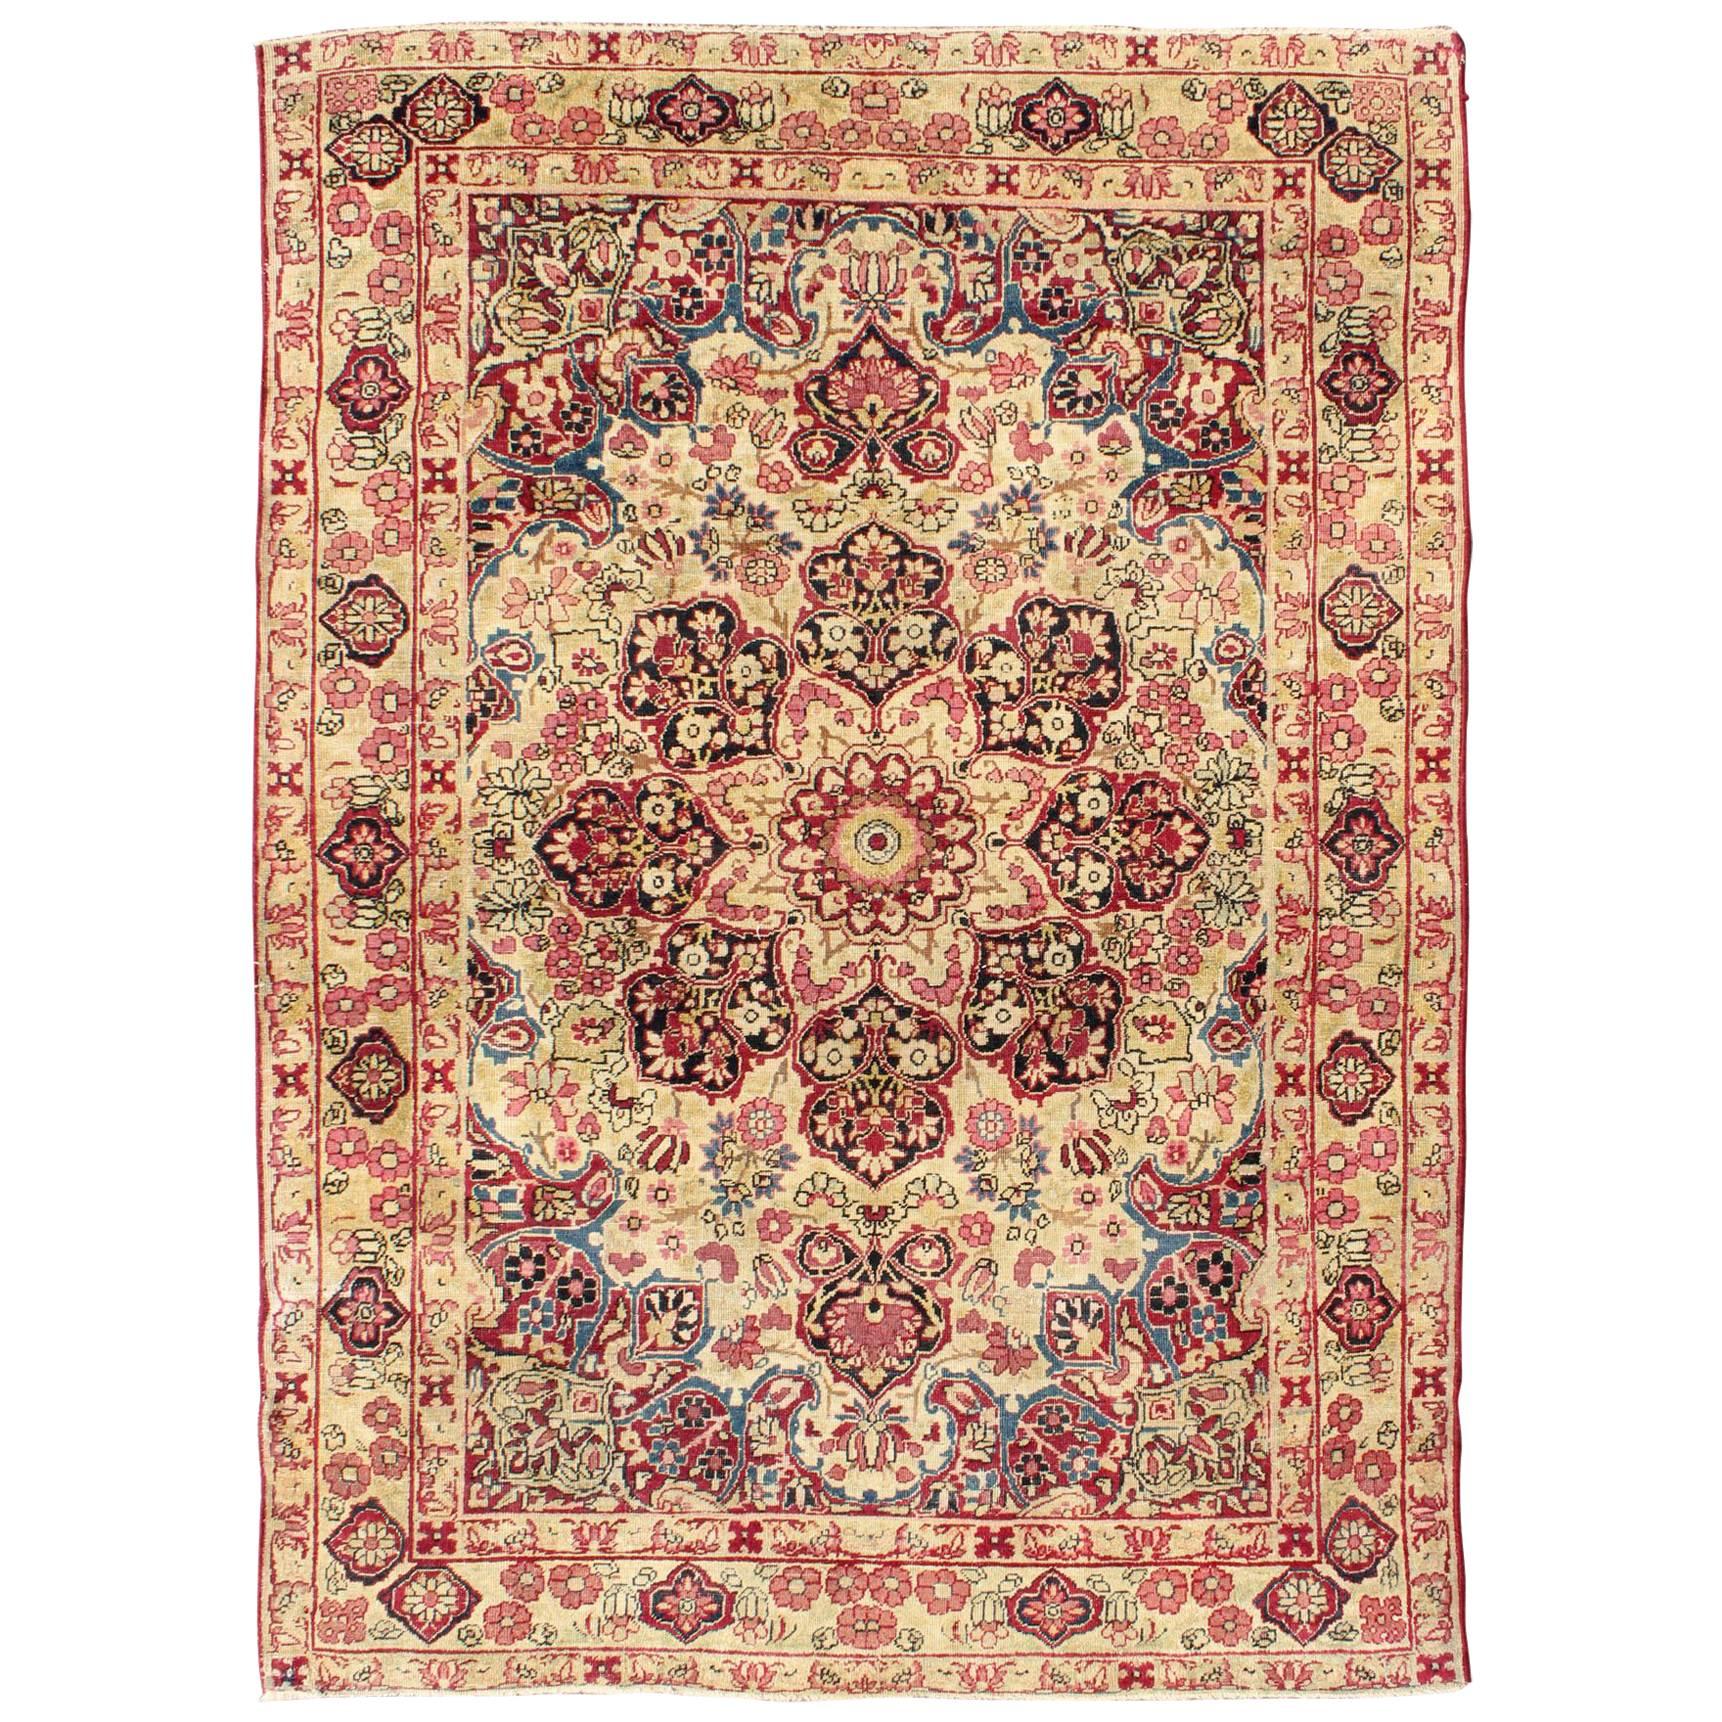 Late 19th Century Antique Lavar-Kerman Rug with Red and Pink Floral Medallion